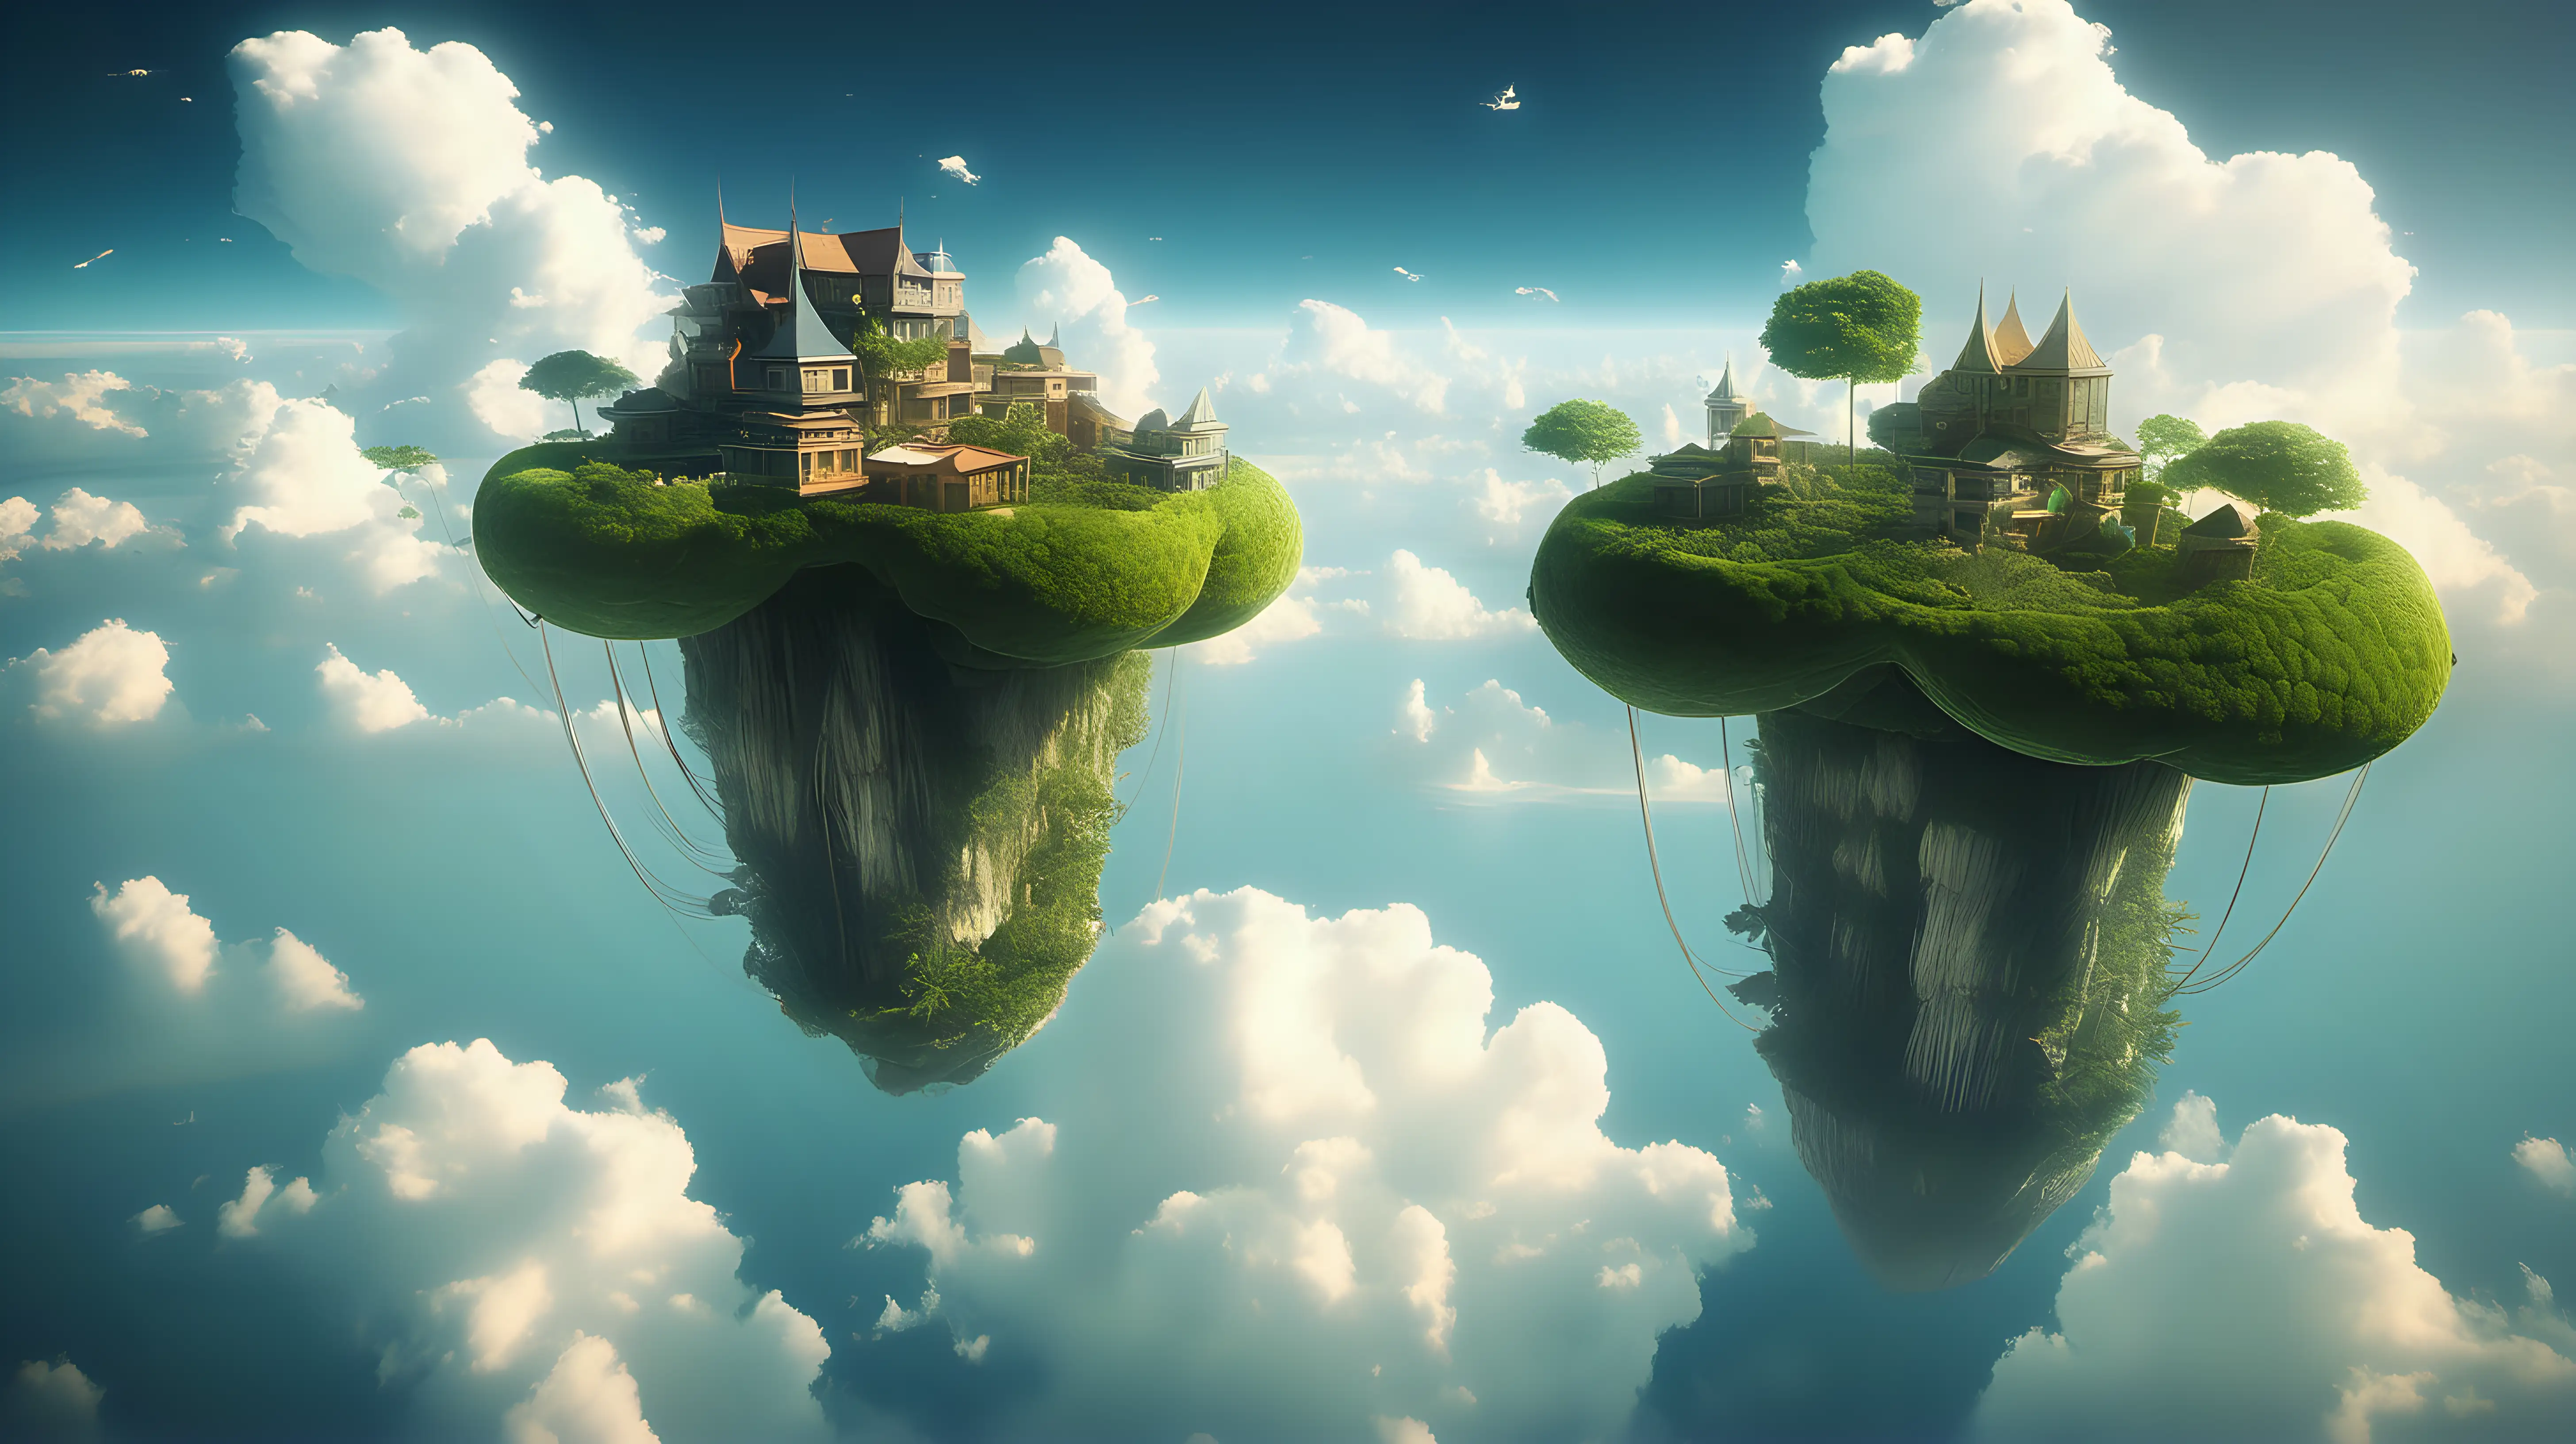 Floating islands in the sky.